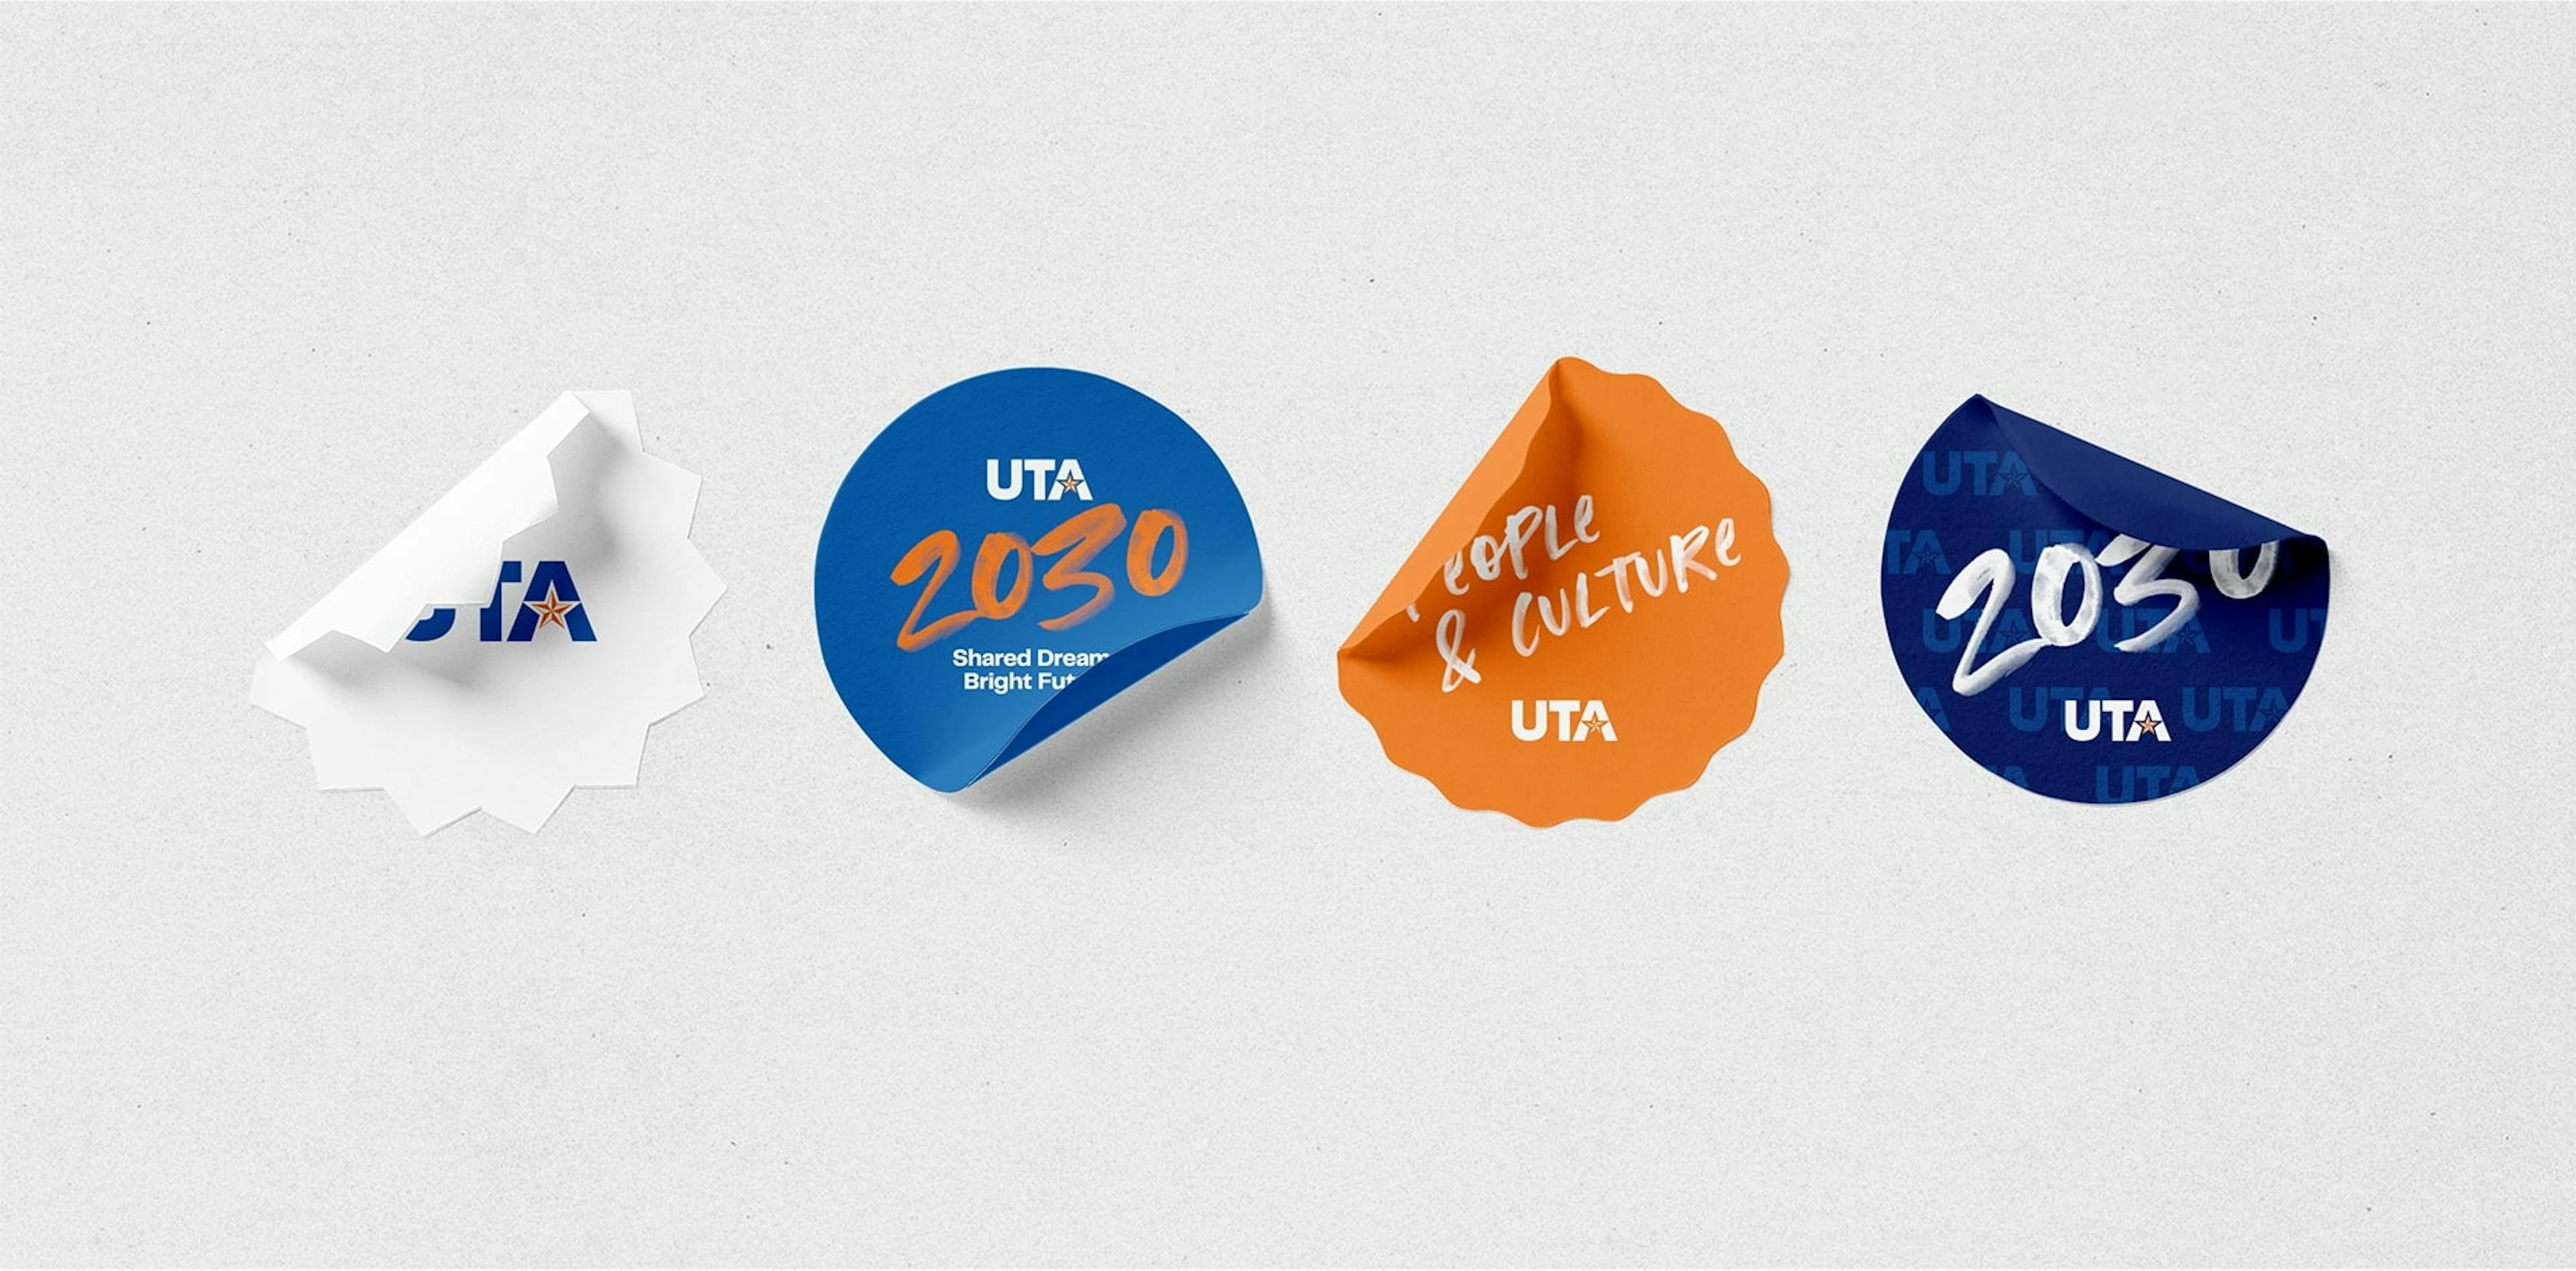 Stickers with the UTA logo and "2030" branding in blue and orange, with phrases like "Shared Dreams, Bright Future," and "People & Culture".